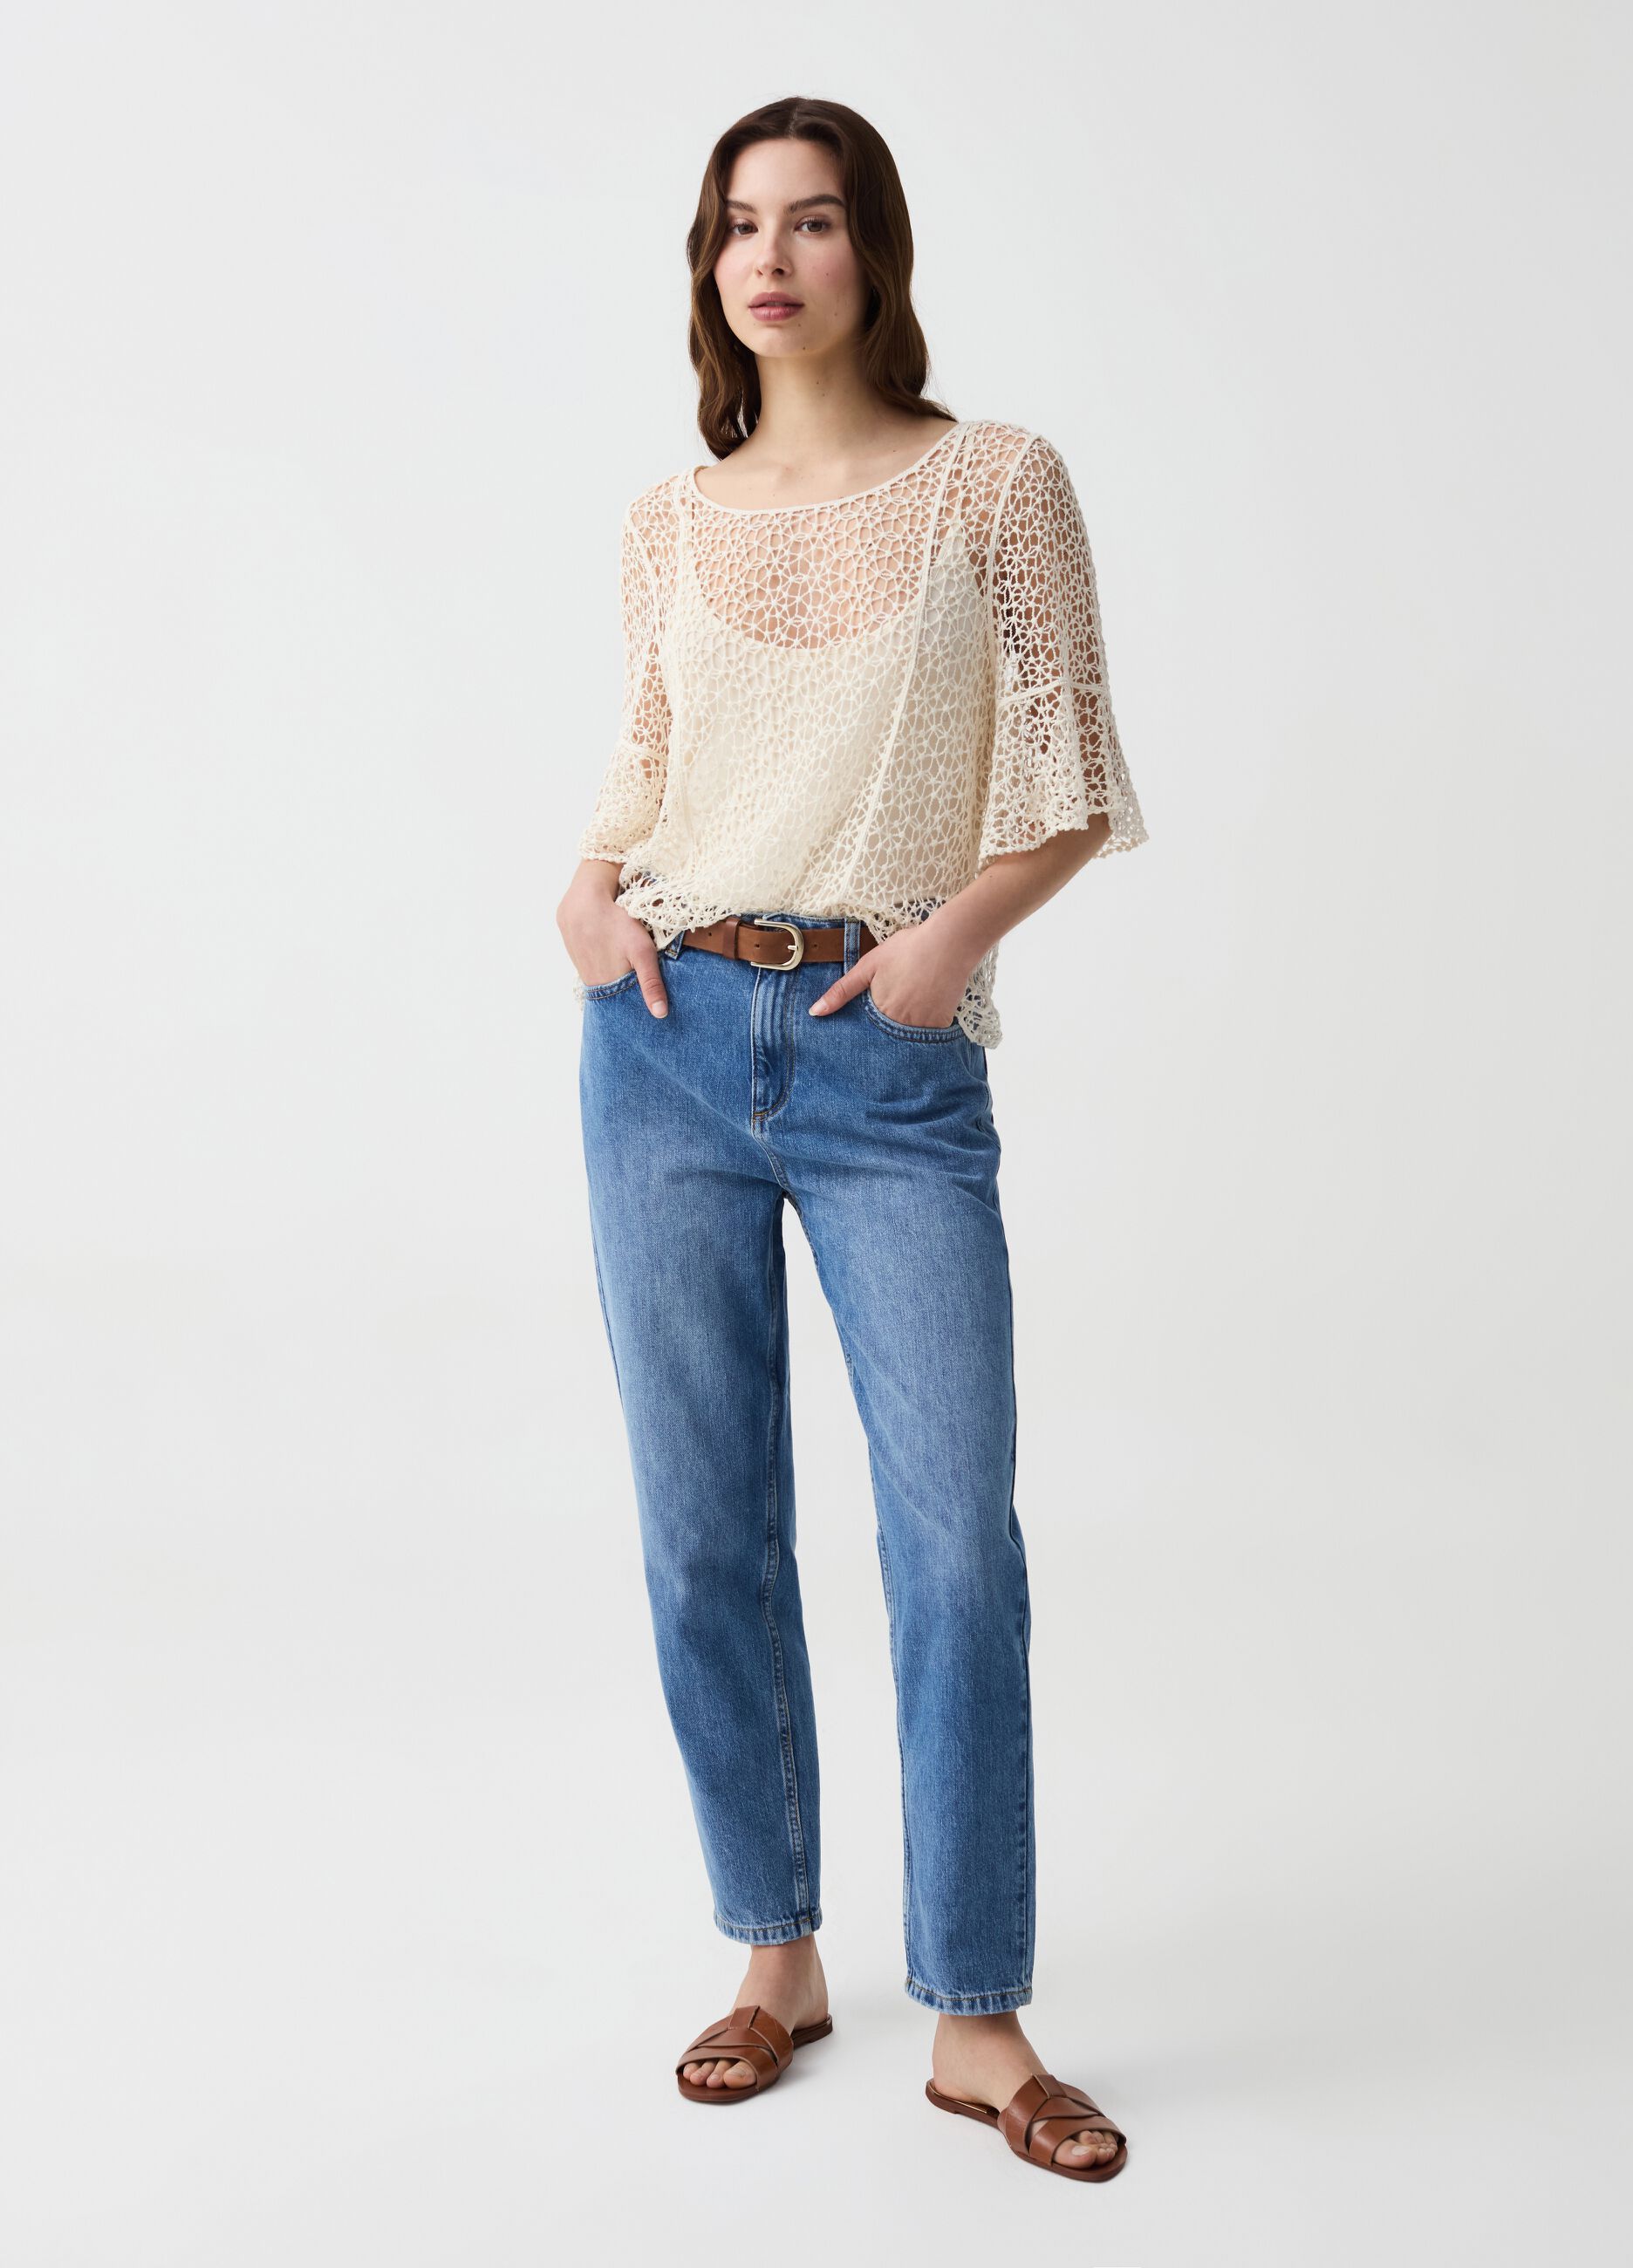 Crochet top with elbow-length sleeves